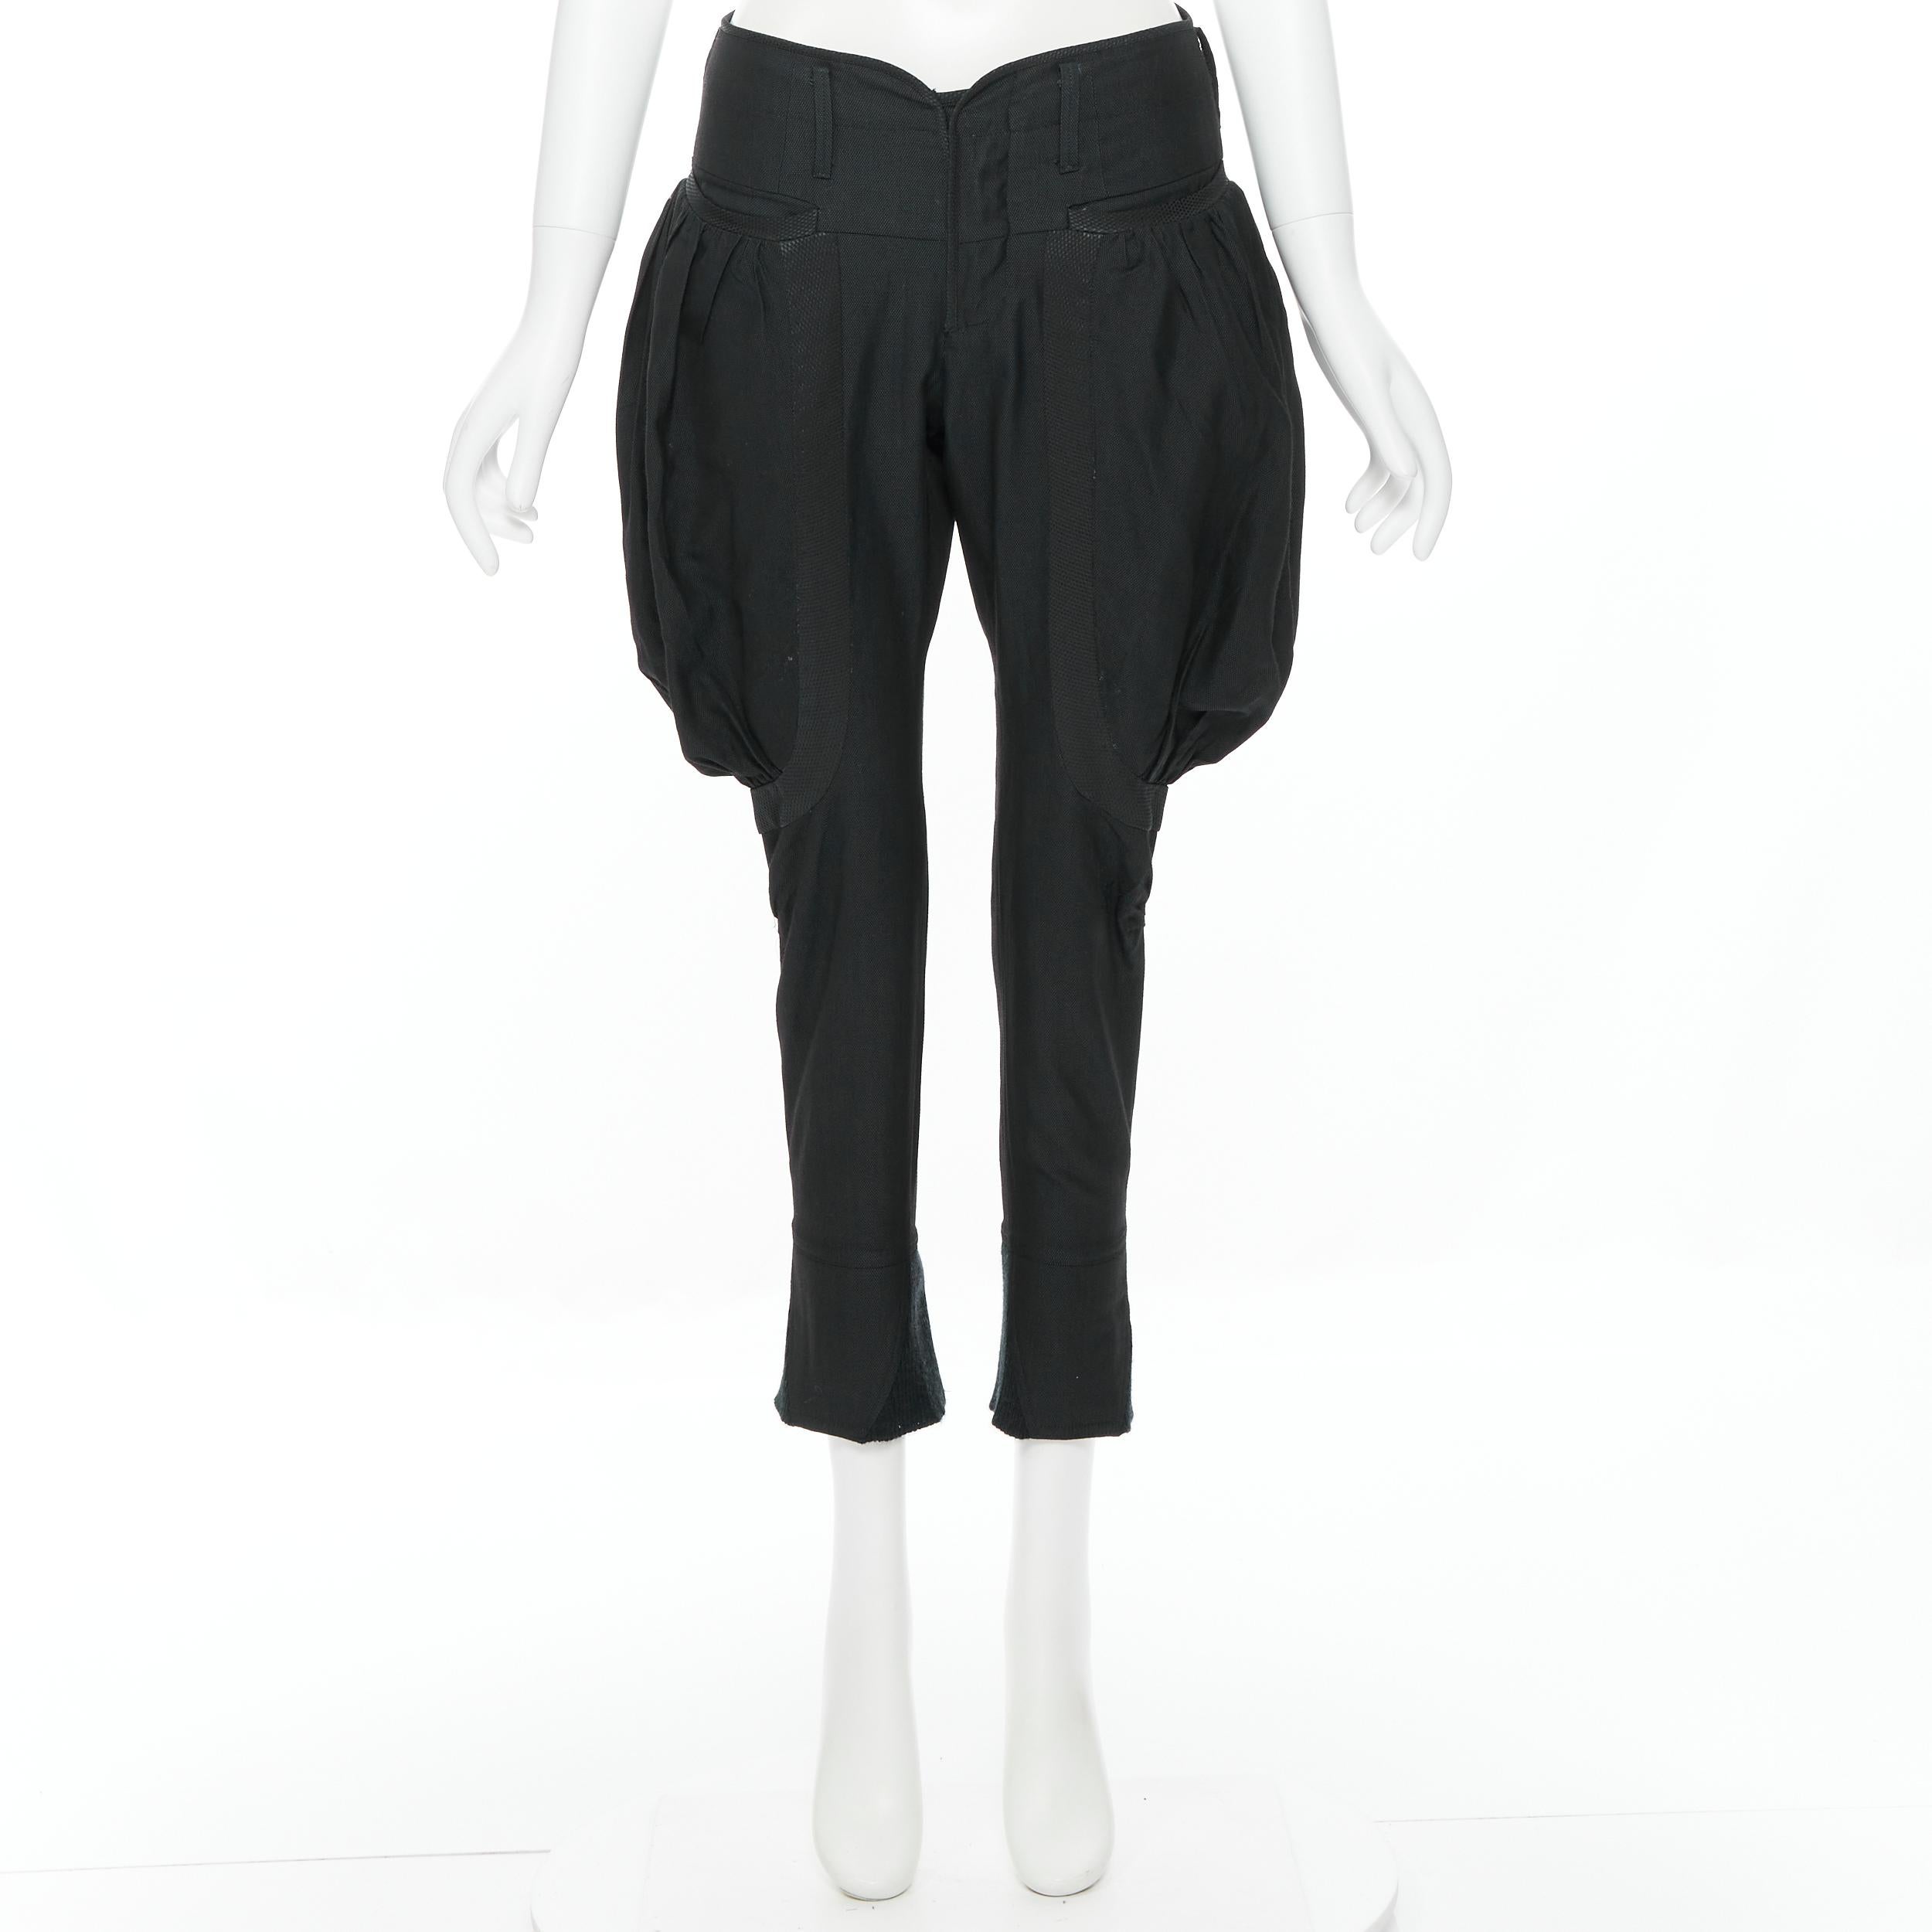 UNDERCOVER black wool silk pleated exaggerated pockets jodphur riding pants M 3